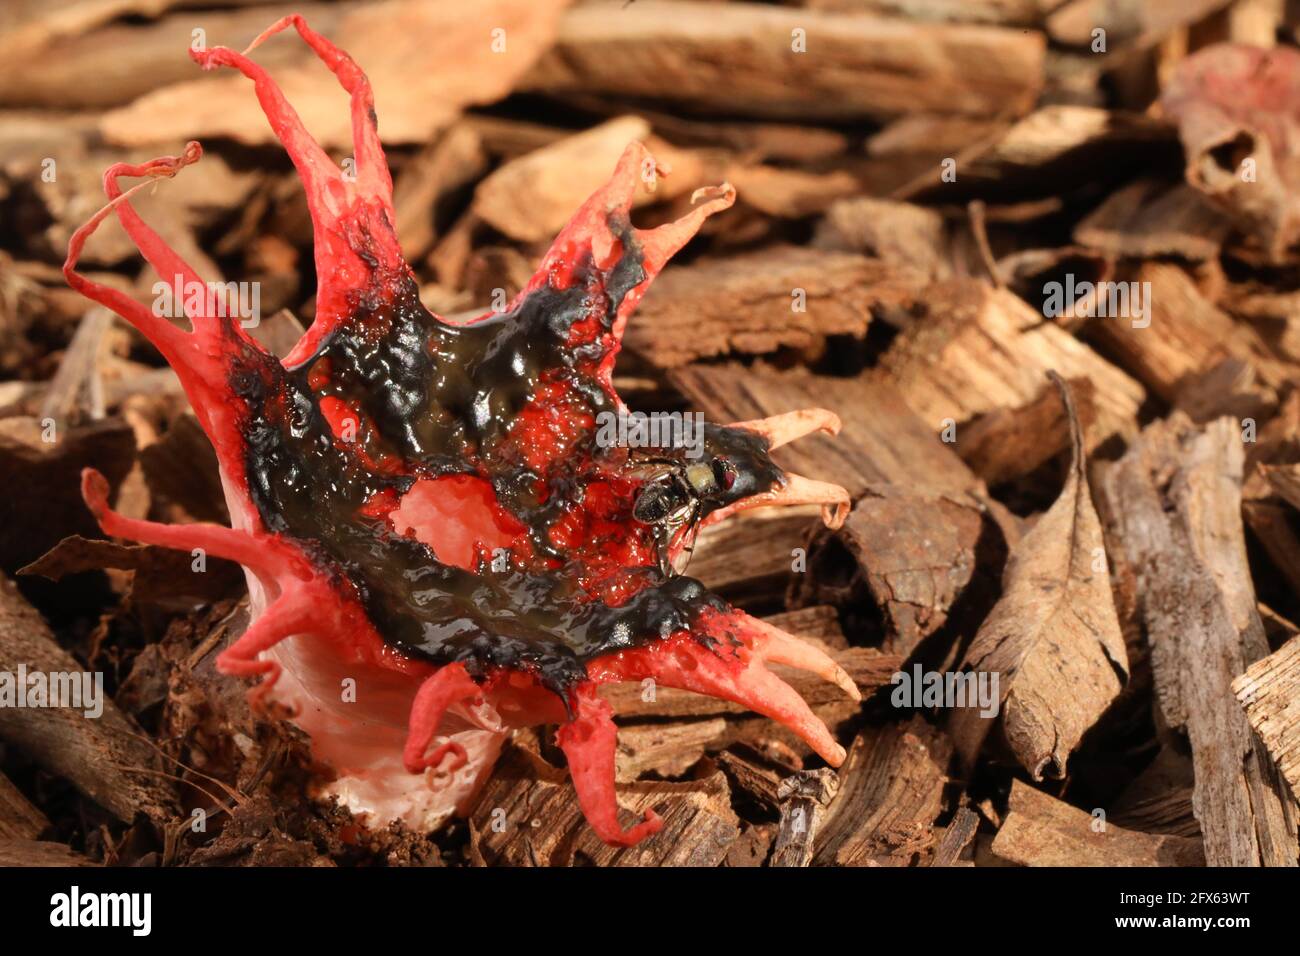 A close up of the Australian Stinkhorn fungus with a fly or native bee sitting on it. Red flesh looking smelly foul fungi mushroom on woodchip mulch Stock Photo